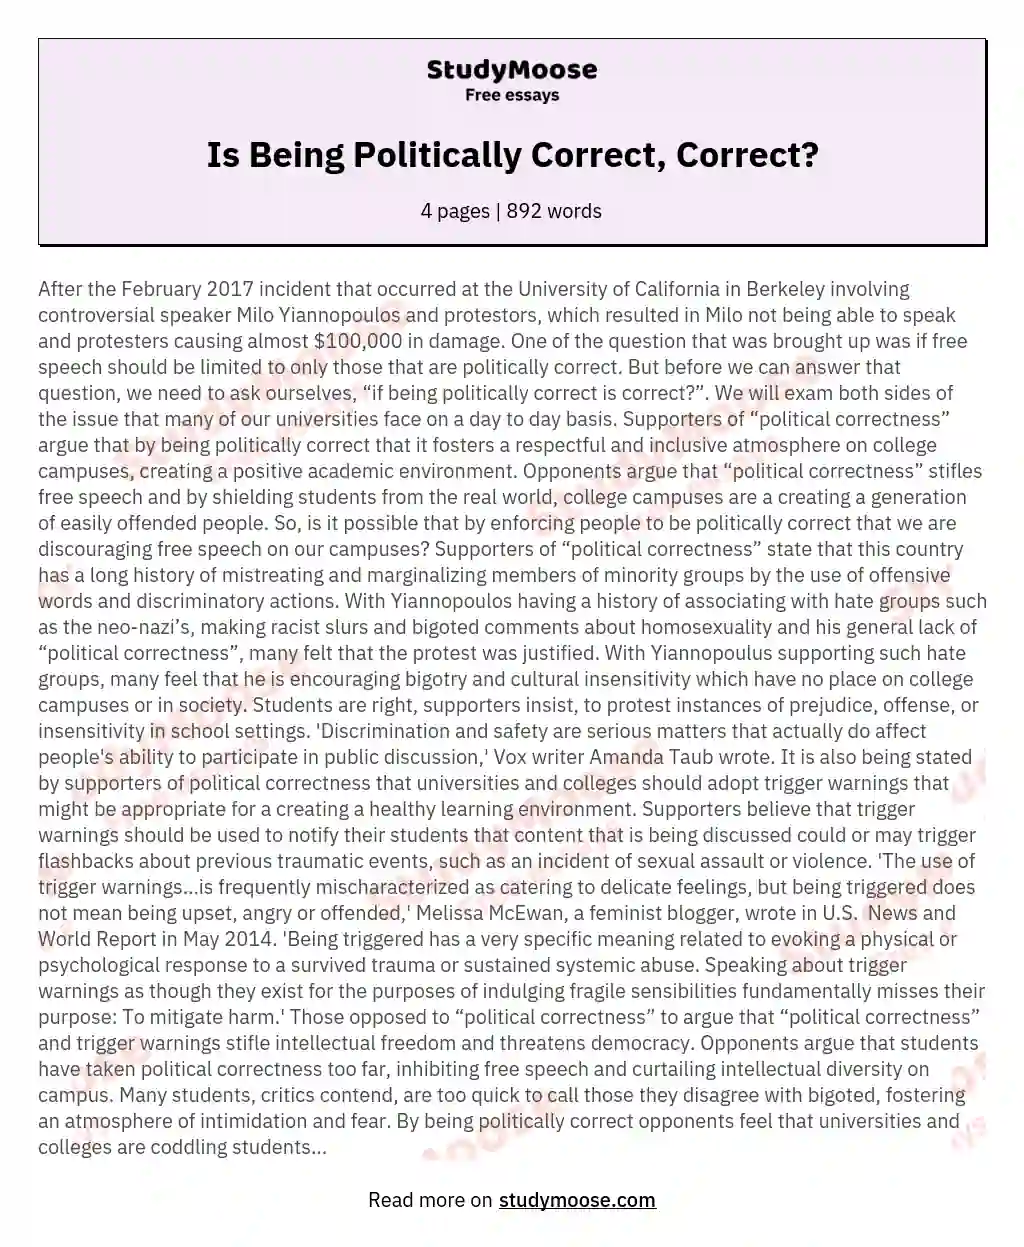 Is Being Politically Correct, Correct? essay